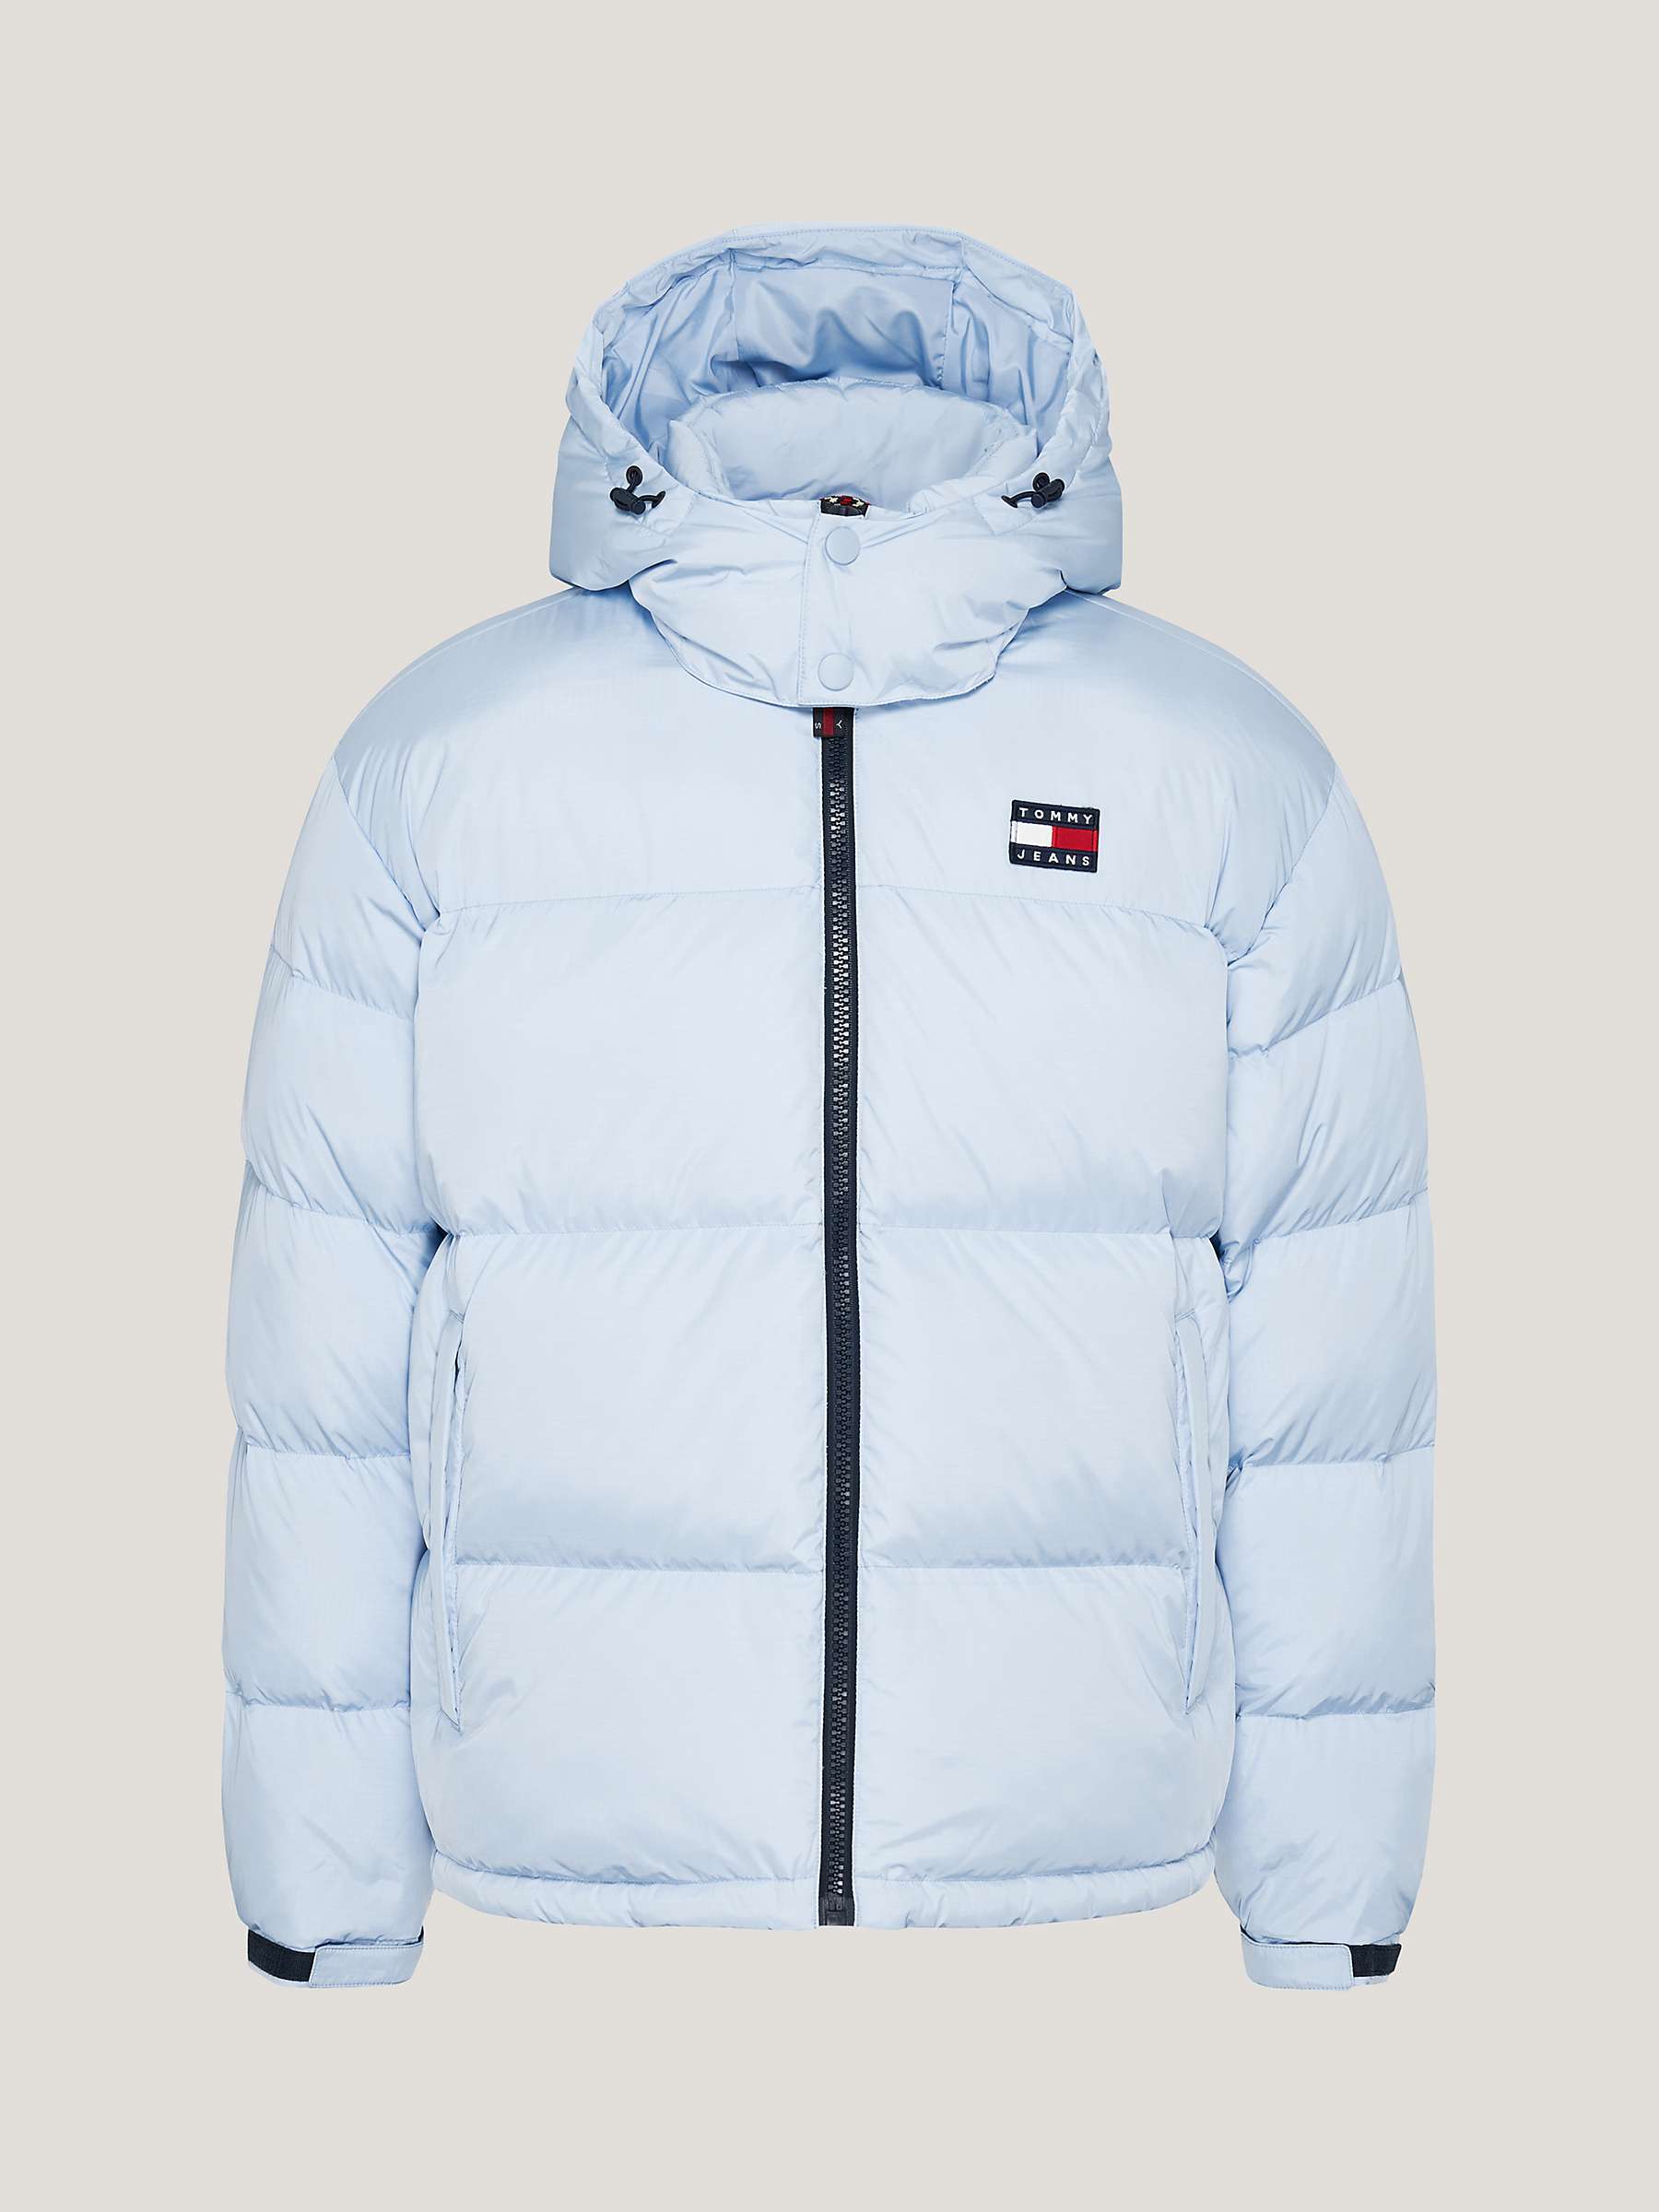 Tommy Jeans Alaska Puffer Jacket, Chambray Blue at John Lewis & Partners